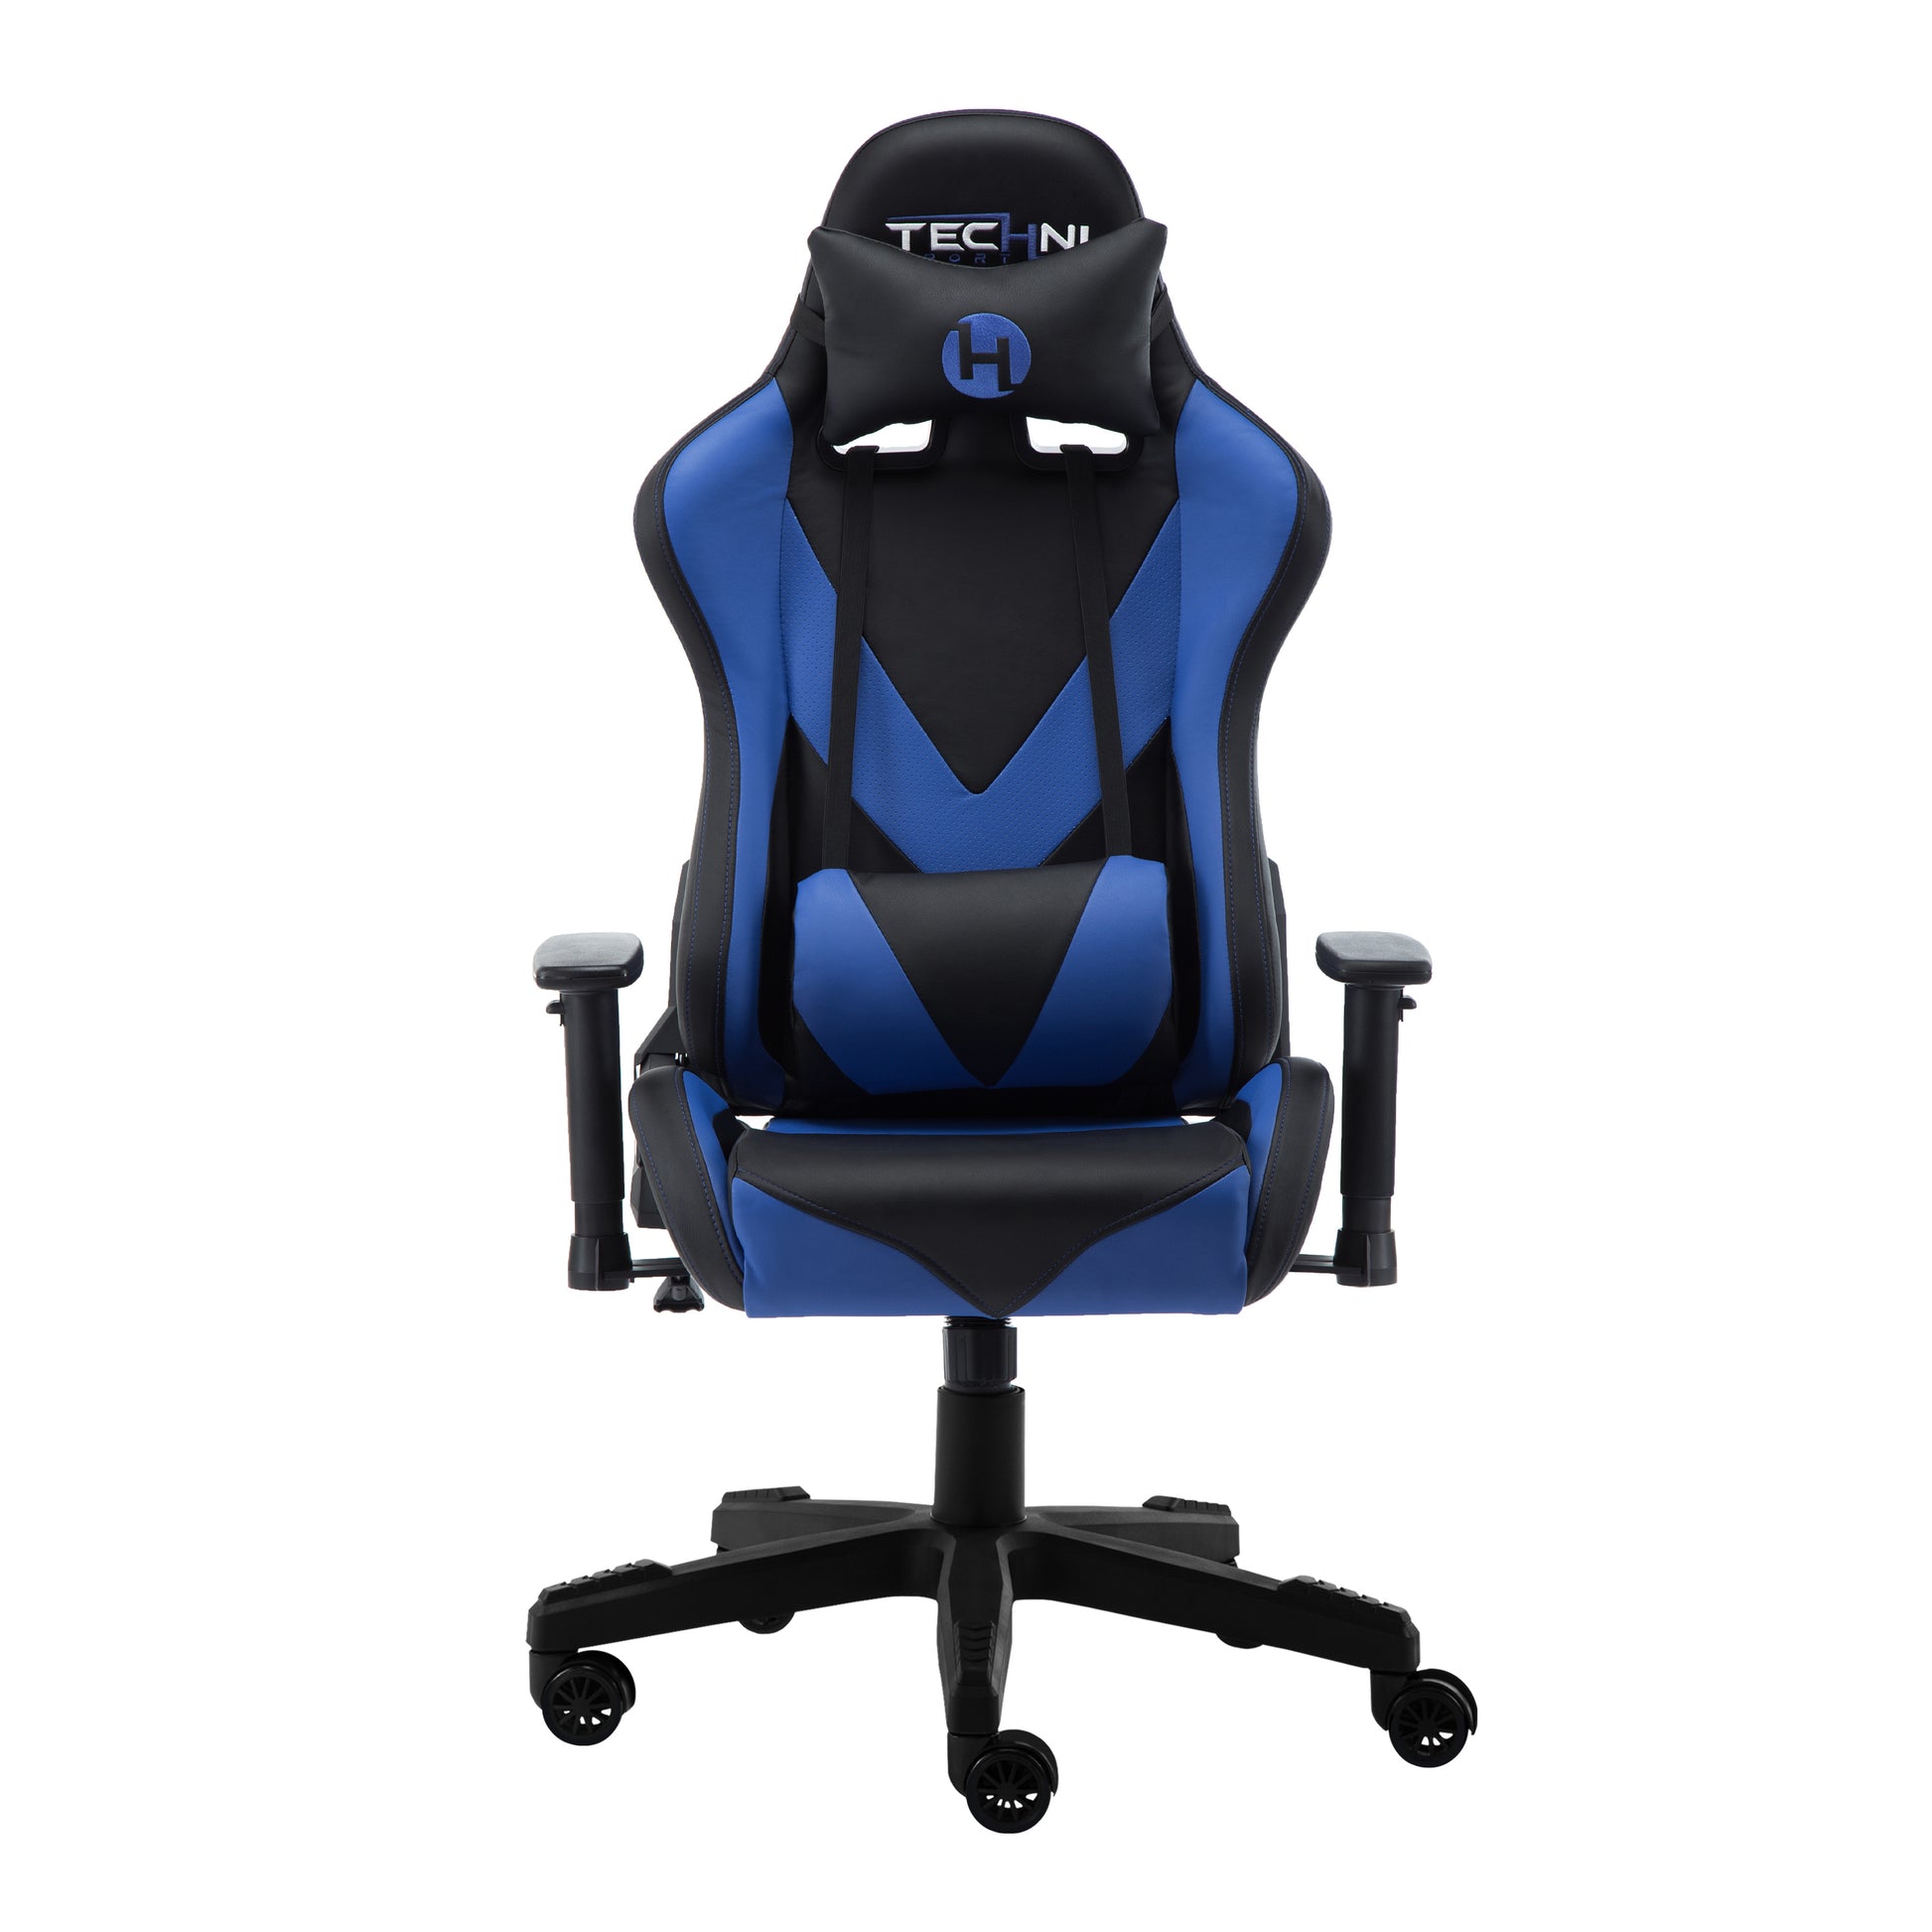 Techni Sport Office-PC Gaming Chair, Blue